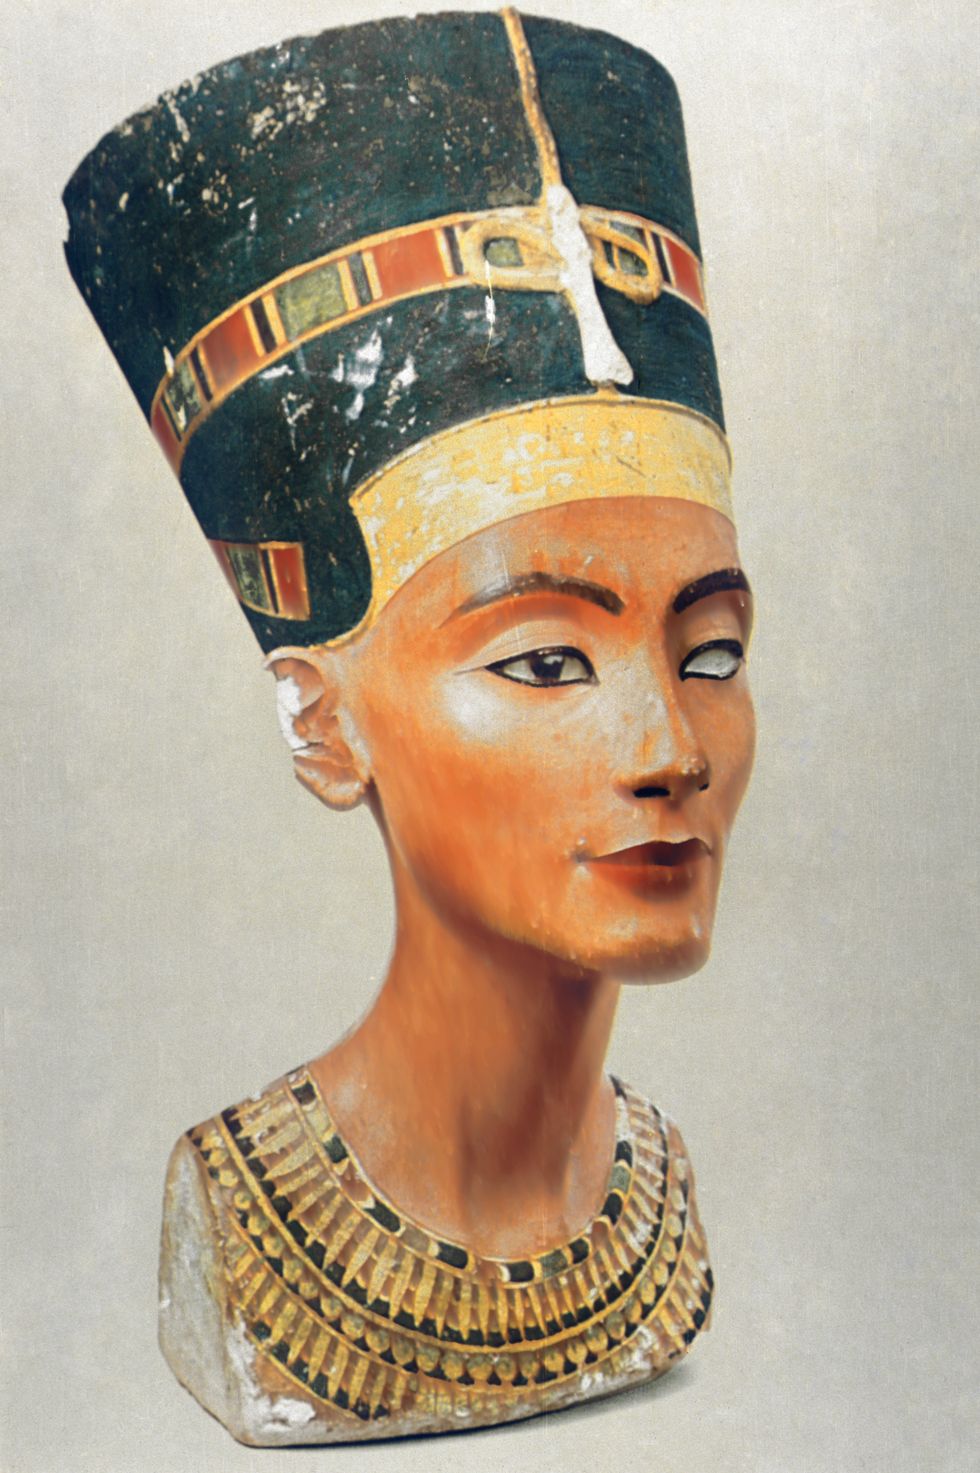 bust of nefertiti, queen and wife of the ancient egyptian pharaoh akhenaten amenhotep iv